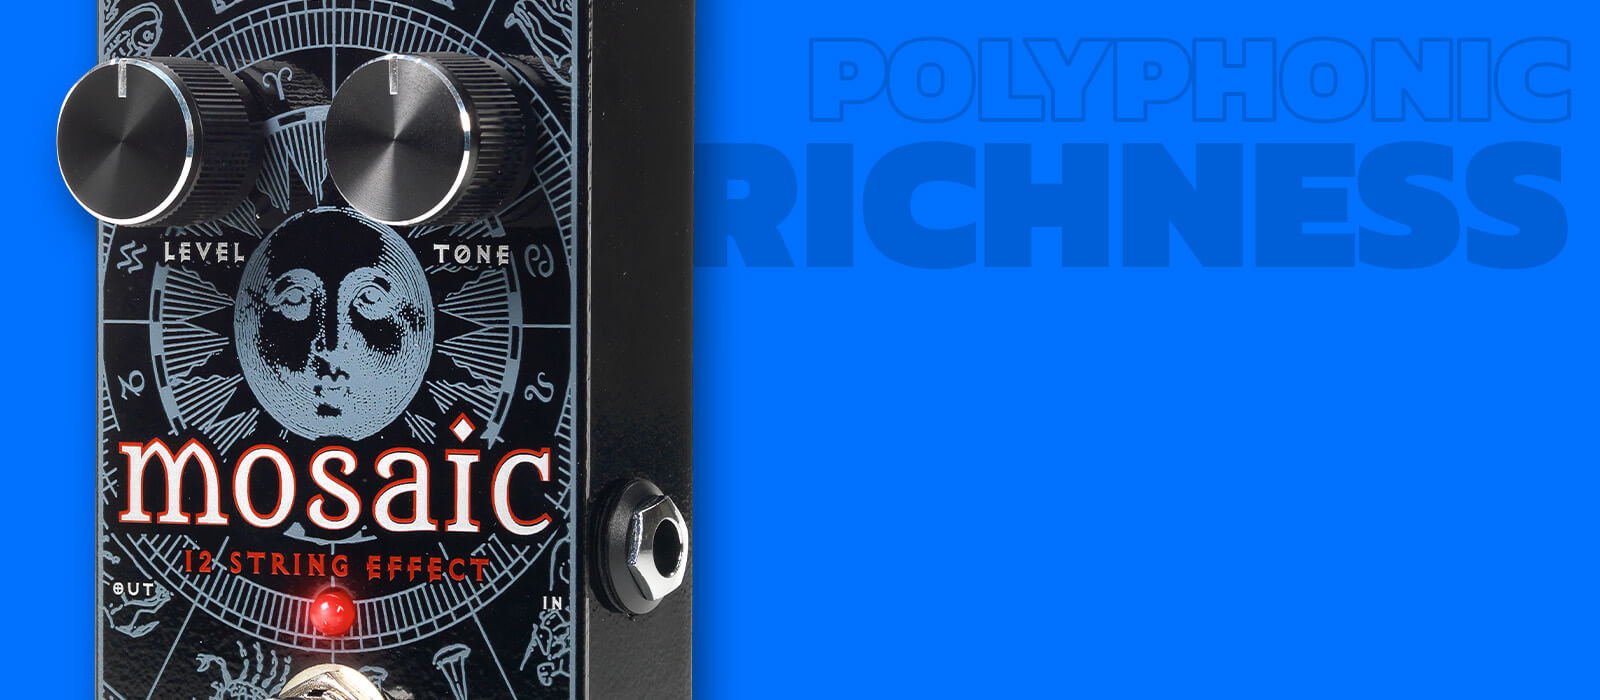 Digitech Mosaic polyphonic 12-string effect guitar pedal in black with gray graphics, blue background with graphics